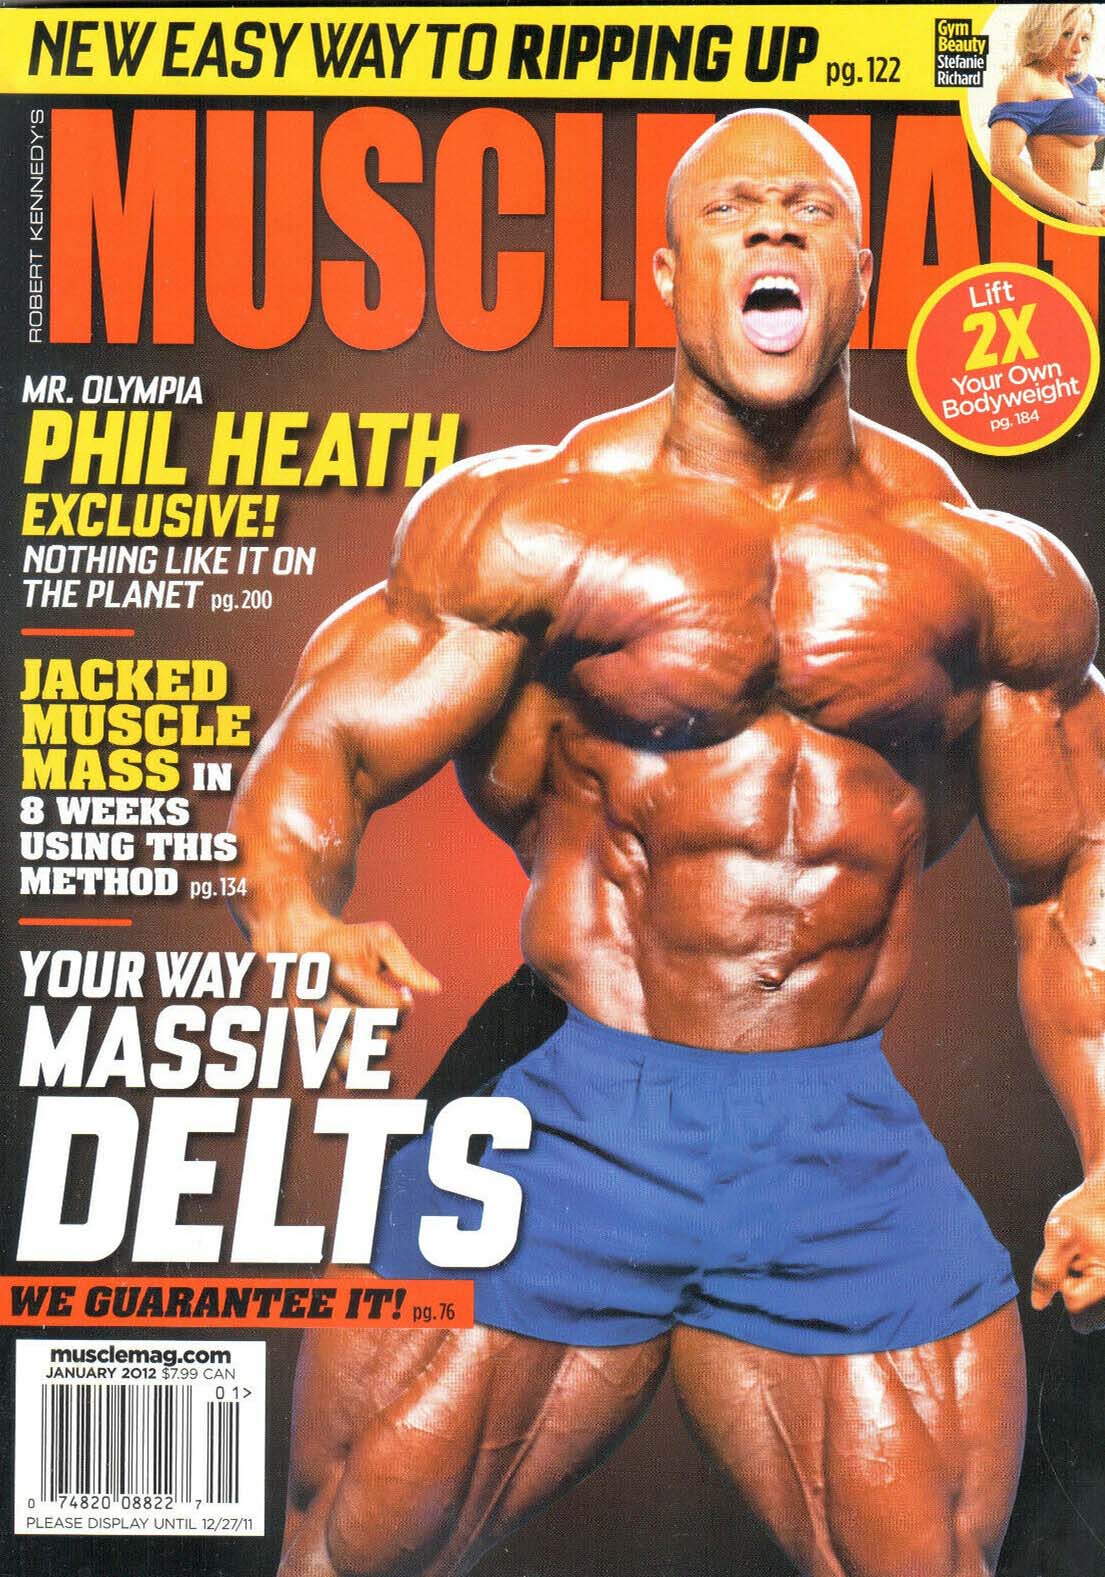 Muscle Mag January 2012 magazine back issue Muscle Mag magizine back copy Muscle Mag January 2012 Bodybuilding and Fitness Magazine Back Issue Published by Canadian Robert Kennedy and Founded in 1974. New Easy Way To Ripping Up.